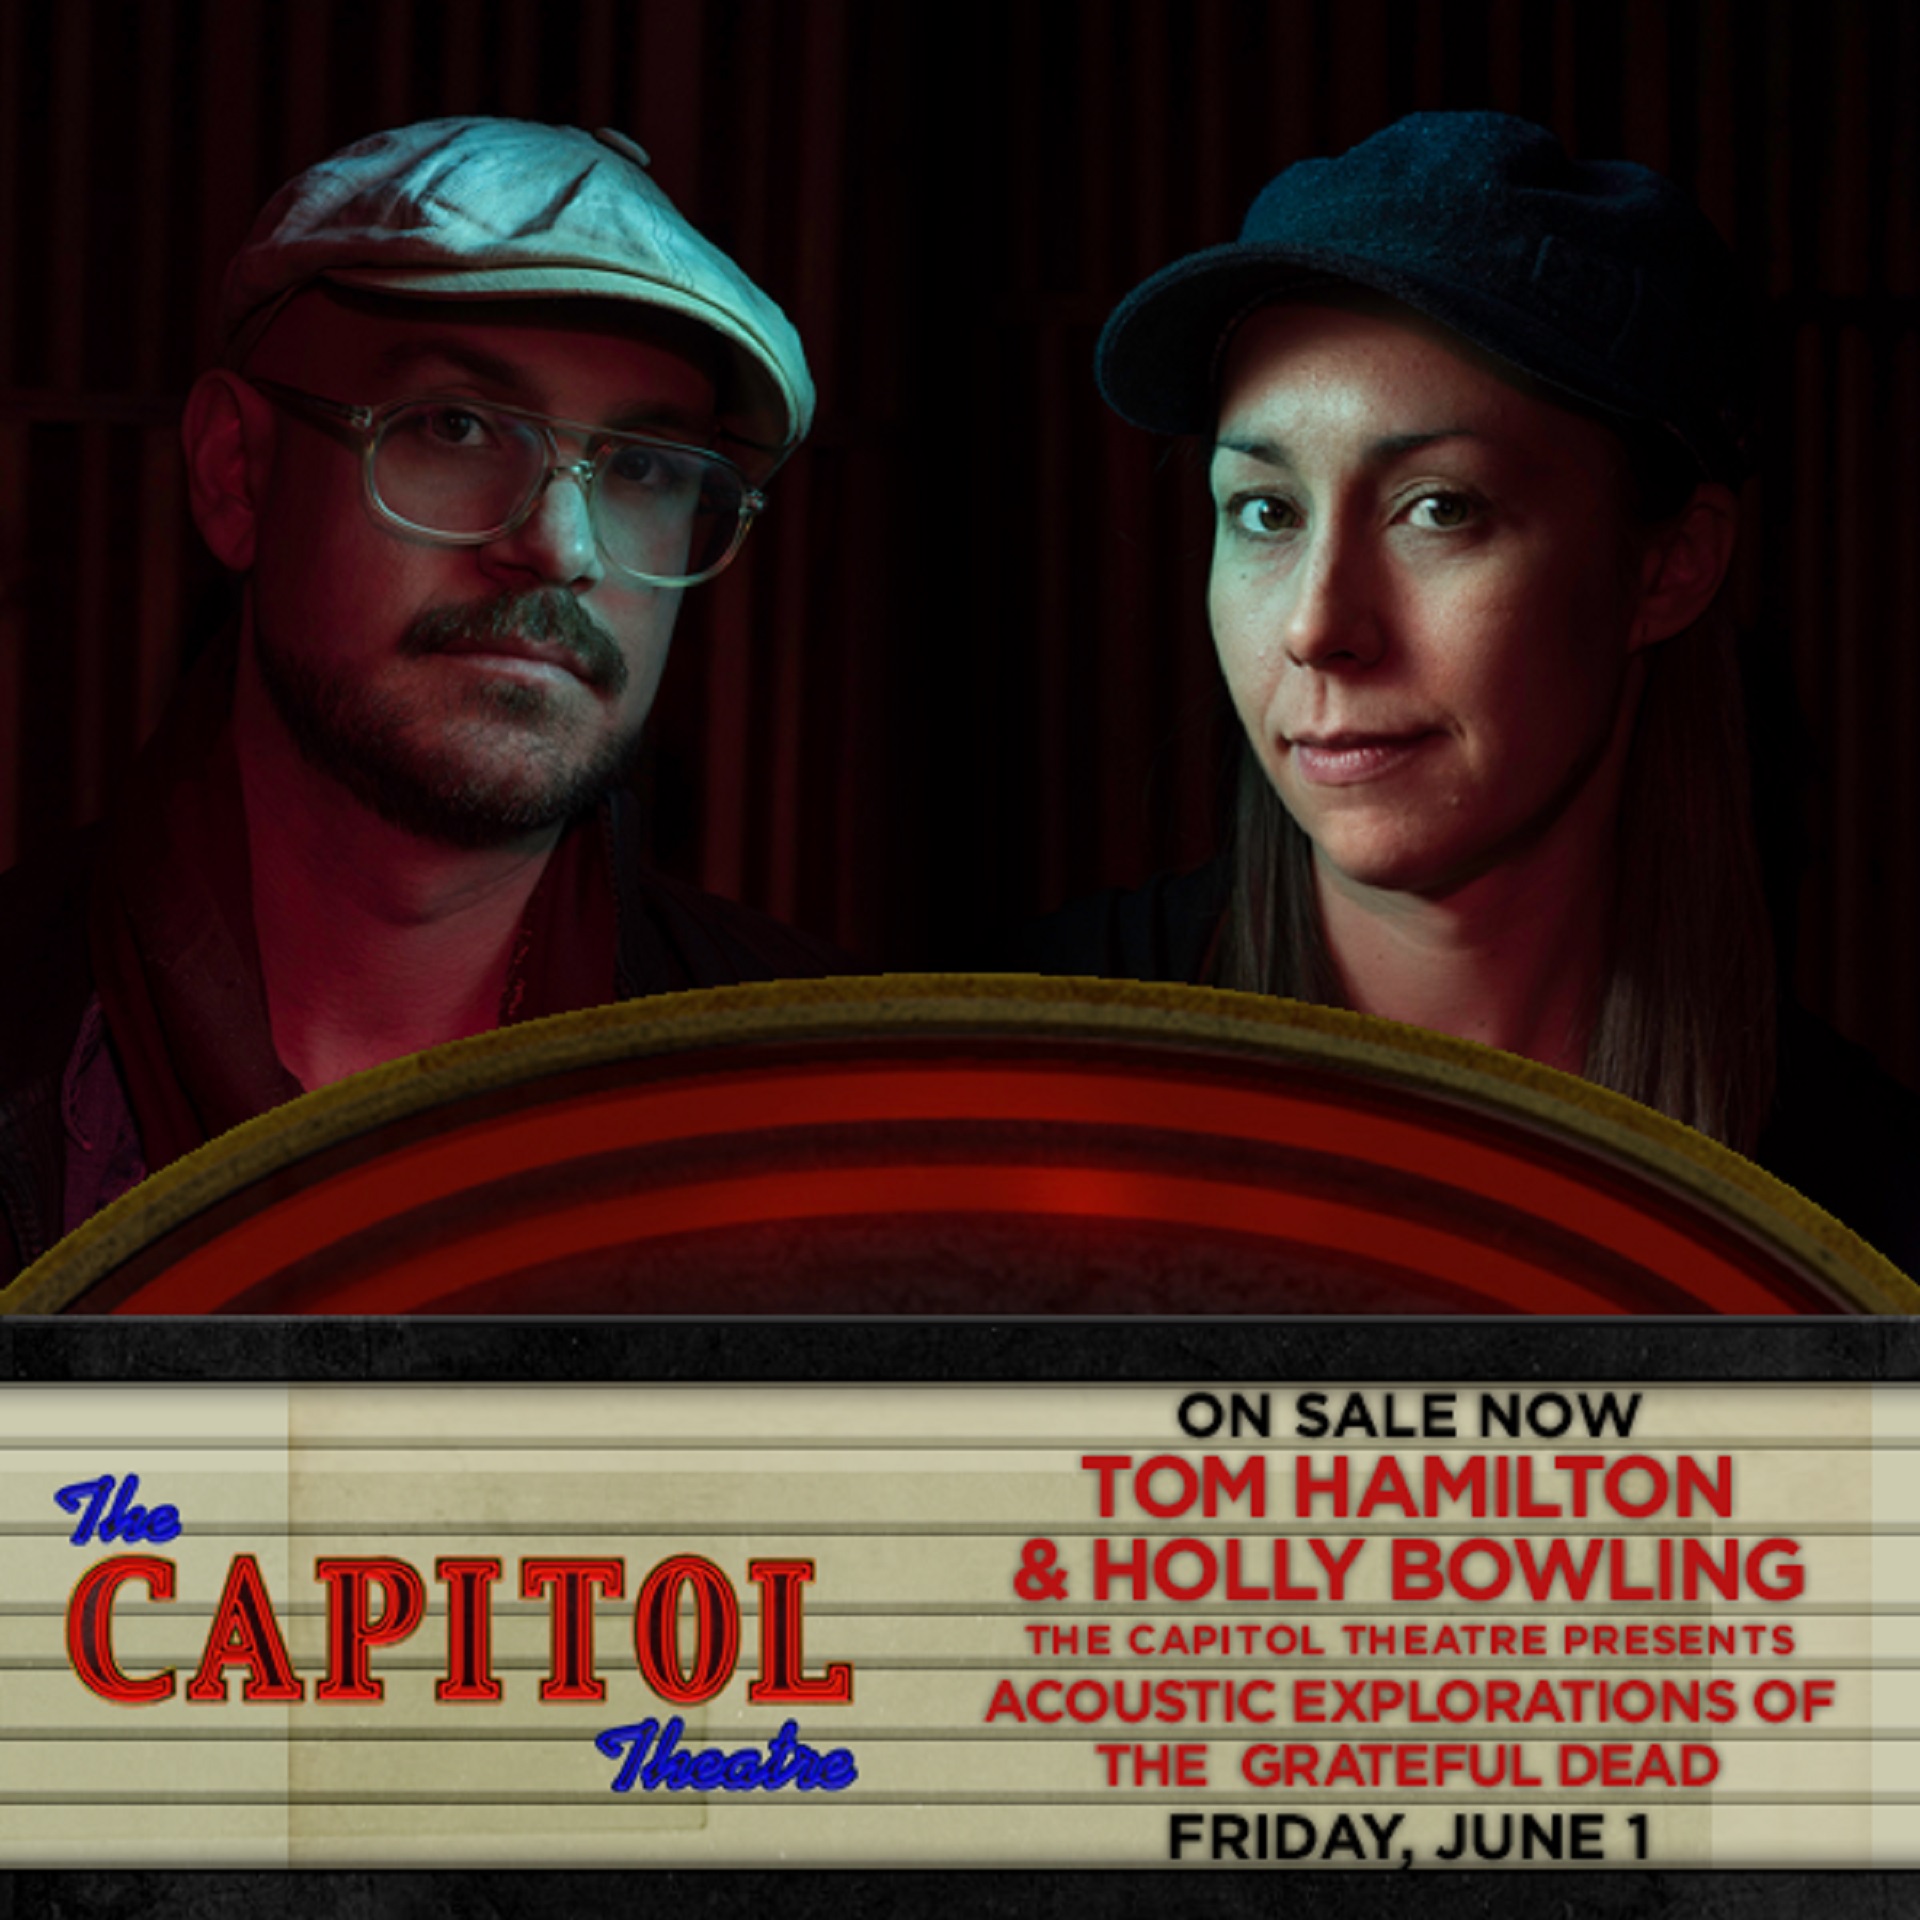 Tom Hamilton and Holly Bowling to perform Acoustic Explorations of The Grateful Dead